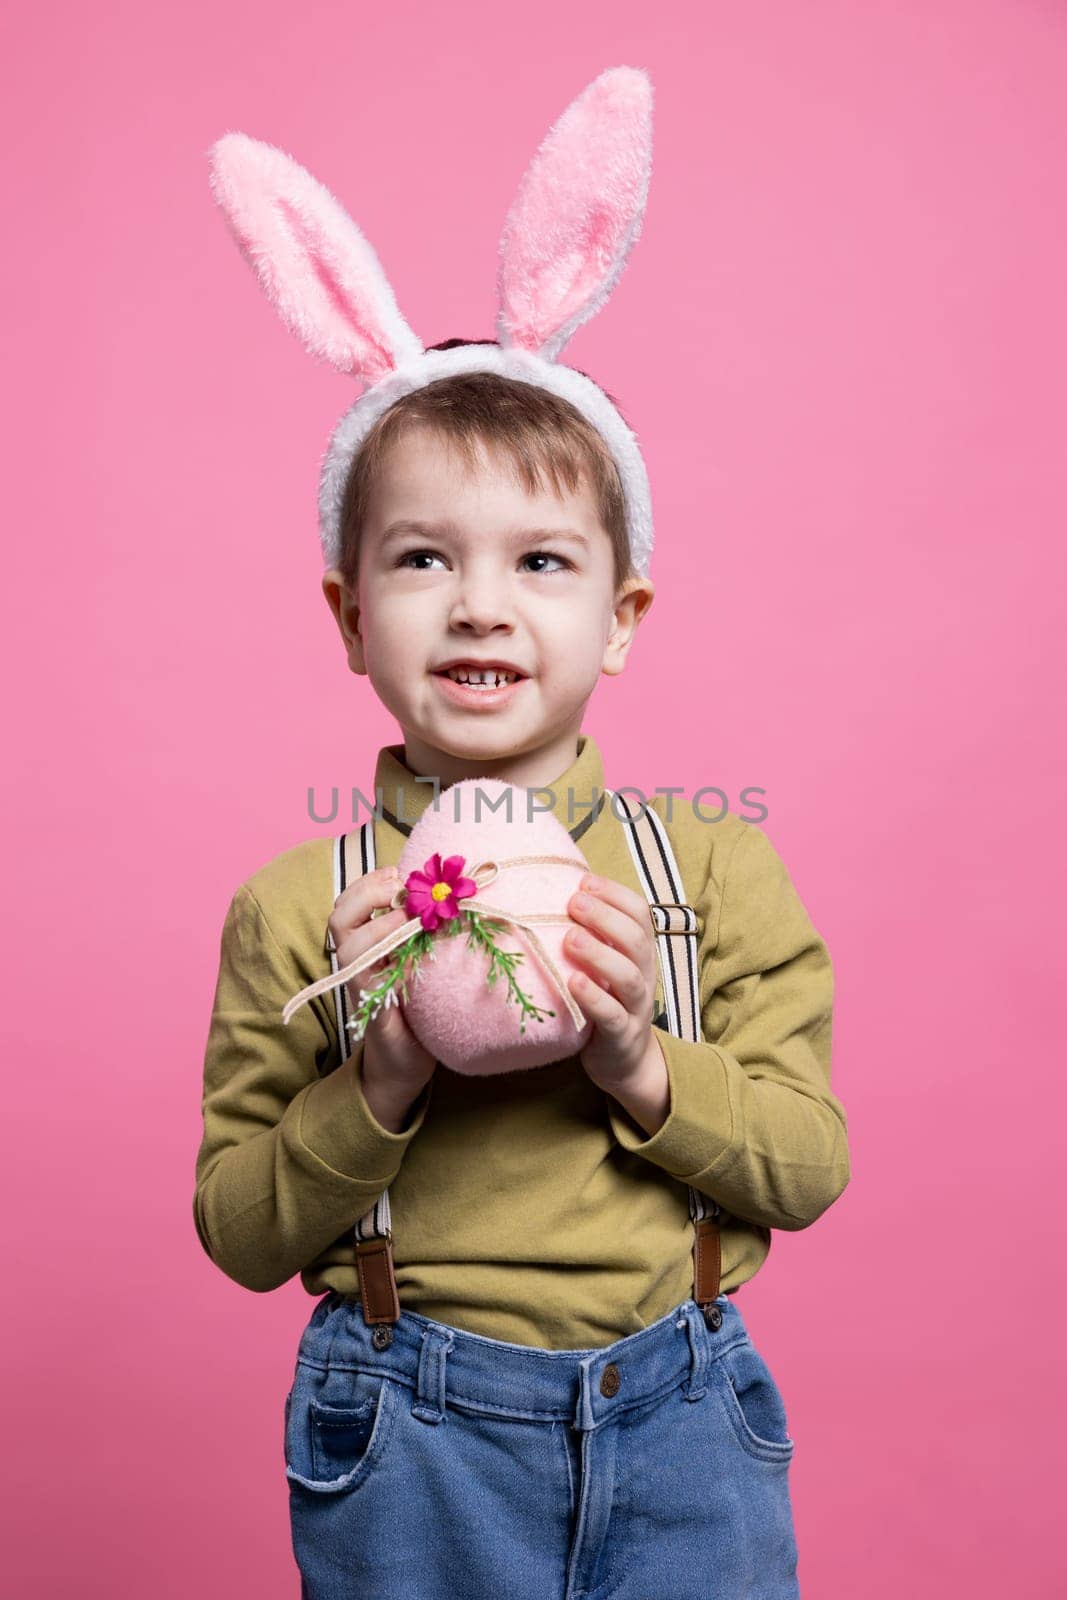 Joyful young child showing a pink egg decorated for easter by DCStudio